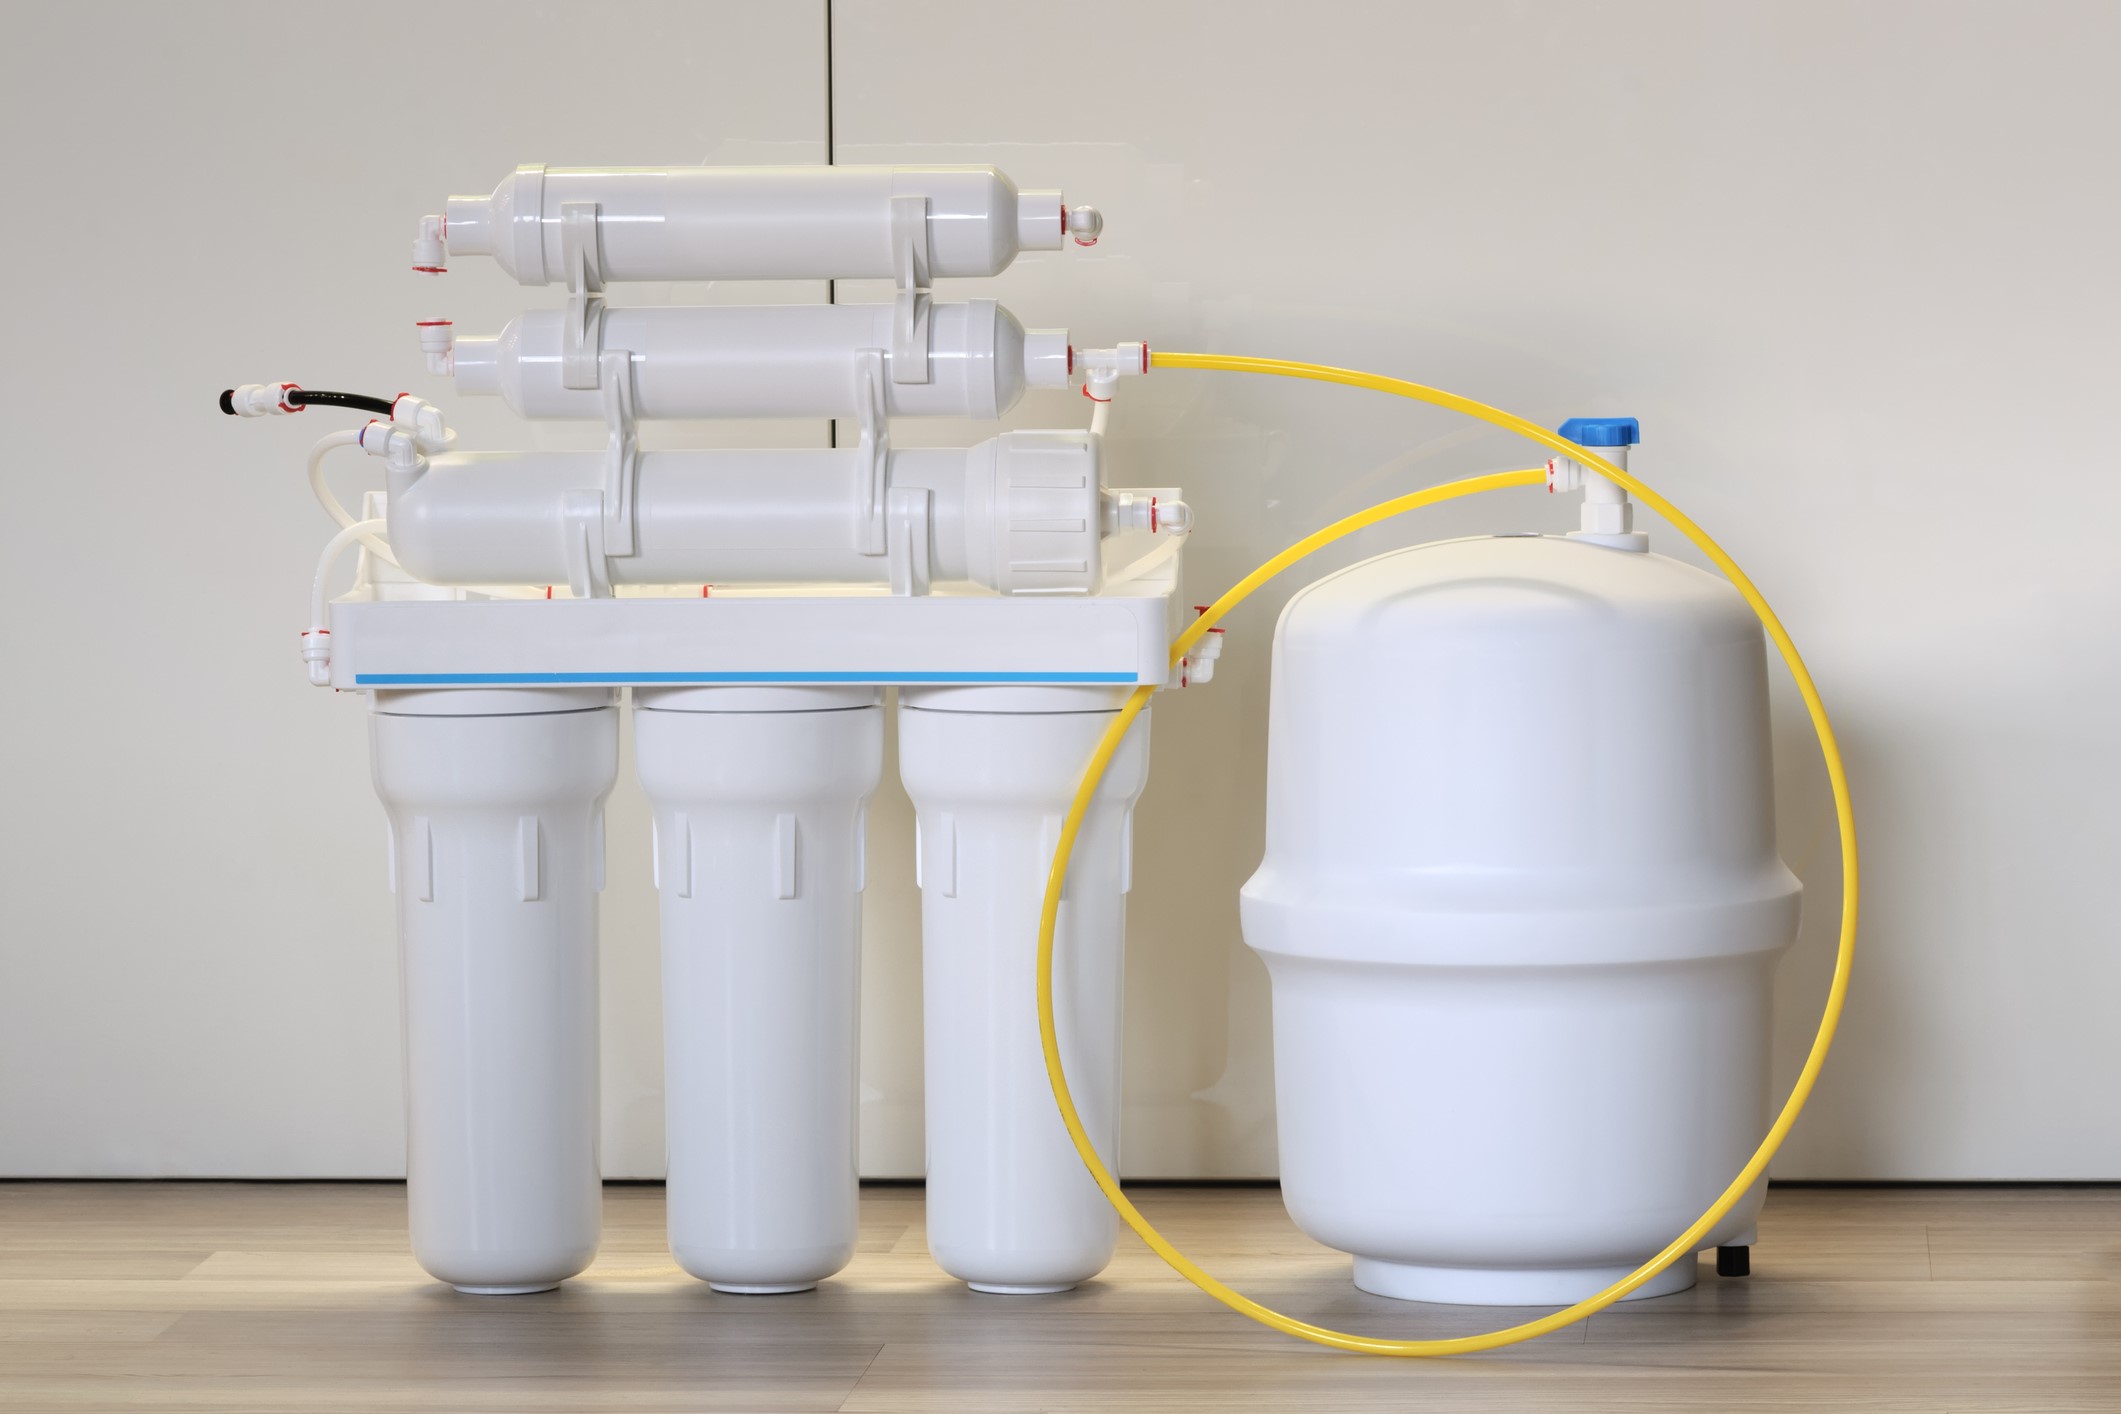 Home Point of Use Reverse Osmosis System easily installs under sink